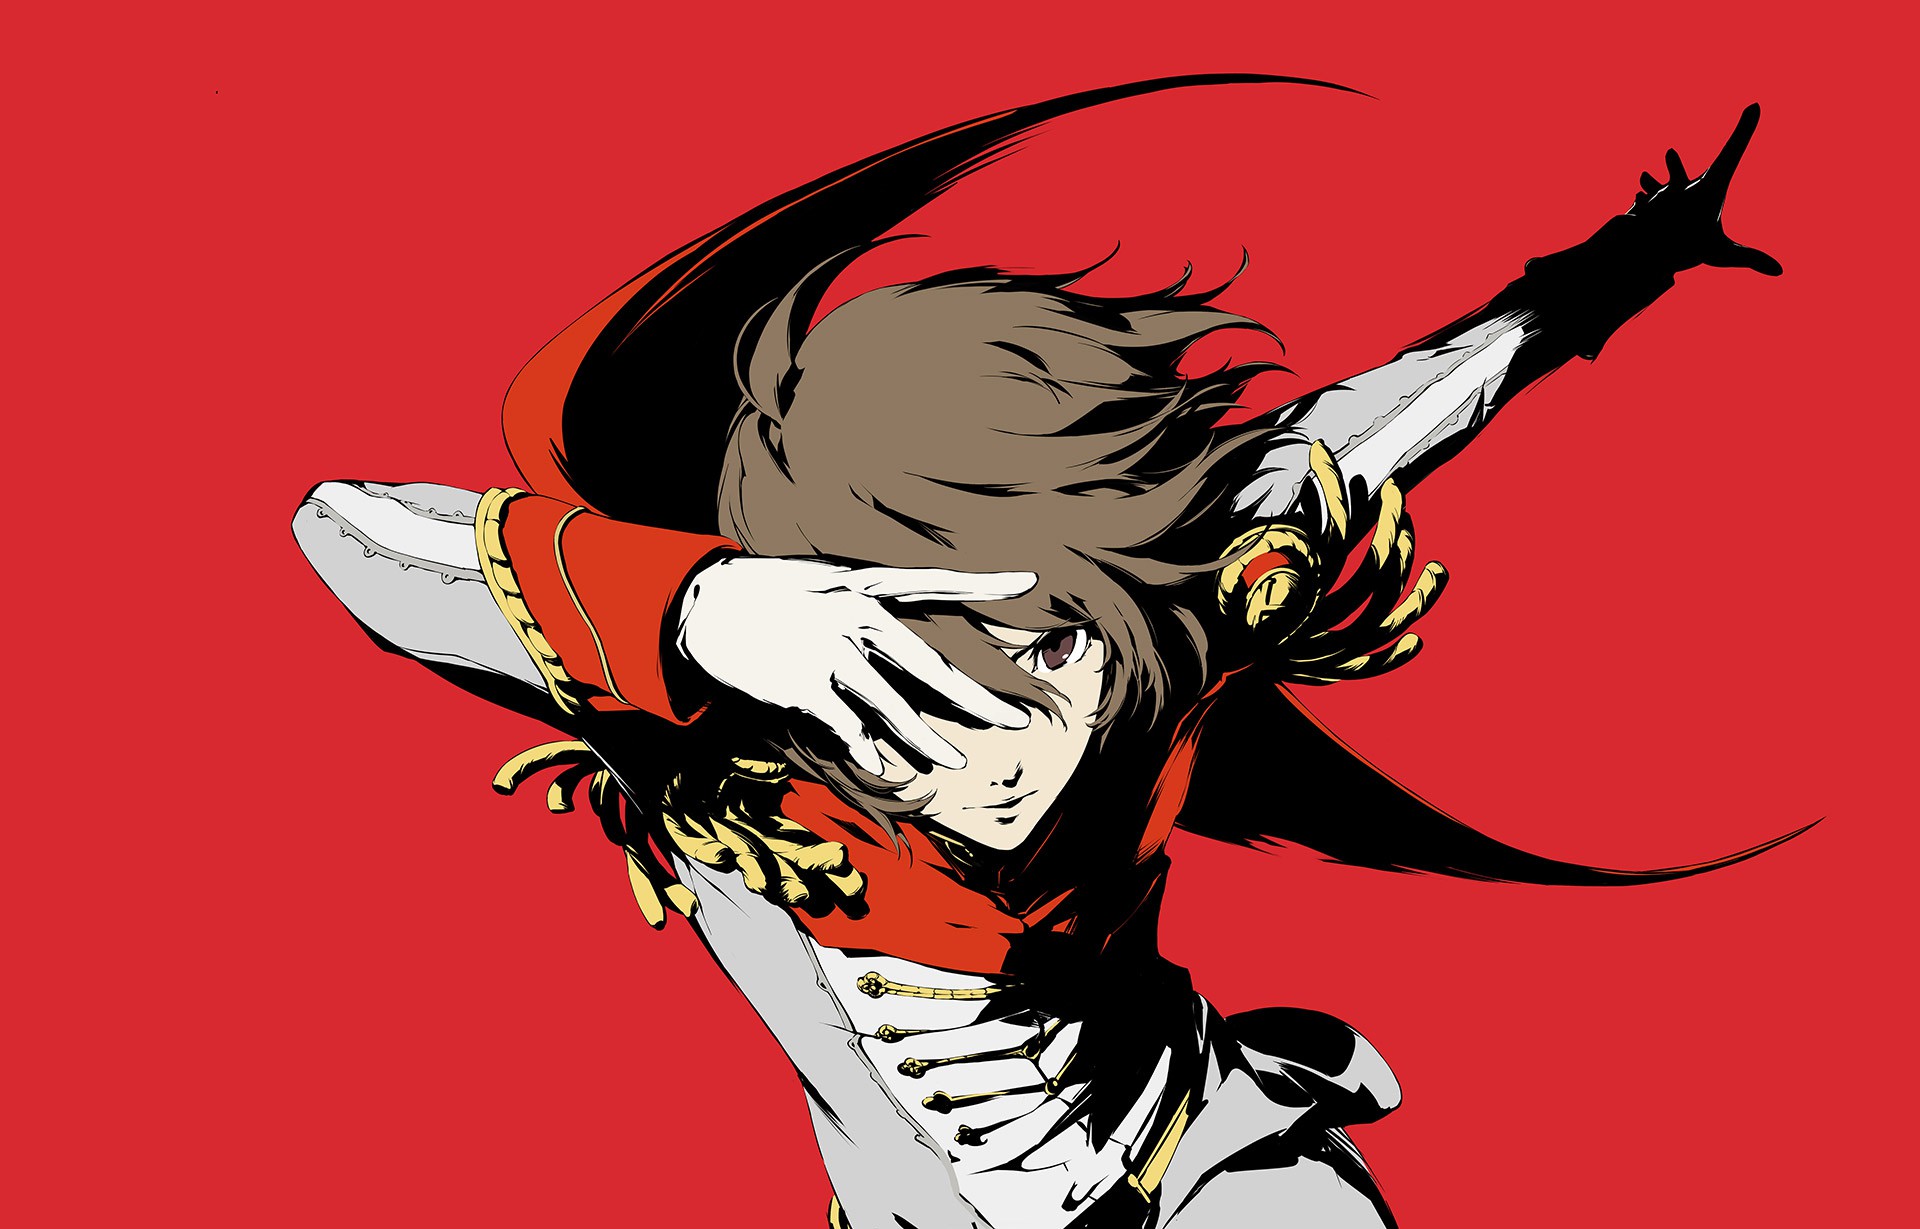 Artwork Akechi | Persona 5 | Atlus | Cook and Becker